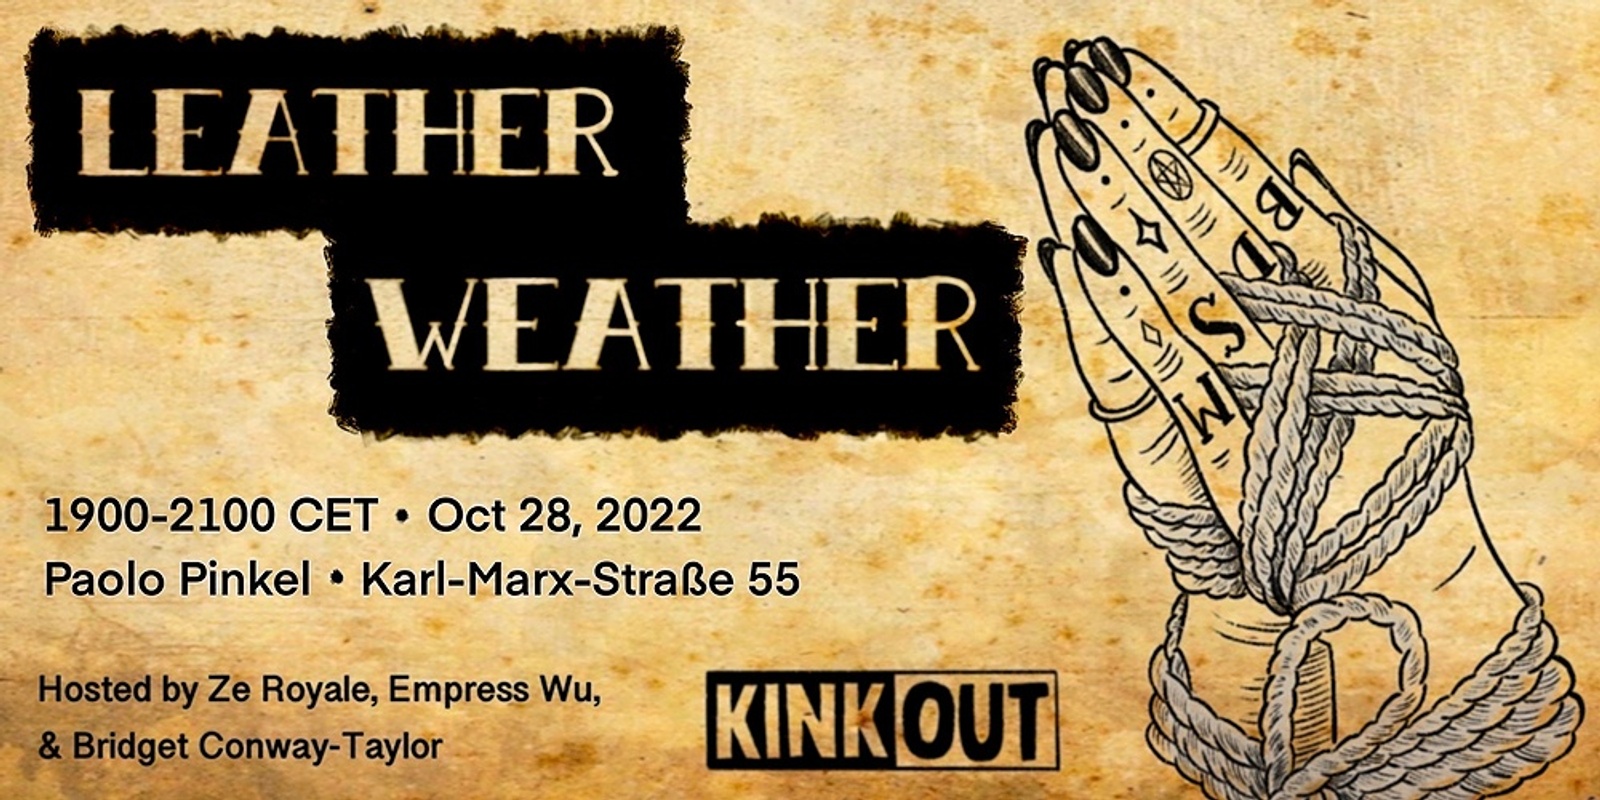 Banner image for LEATHER WEATHER